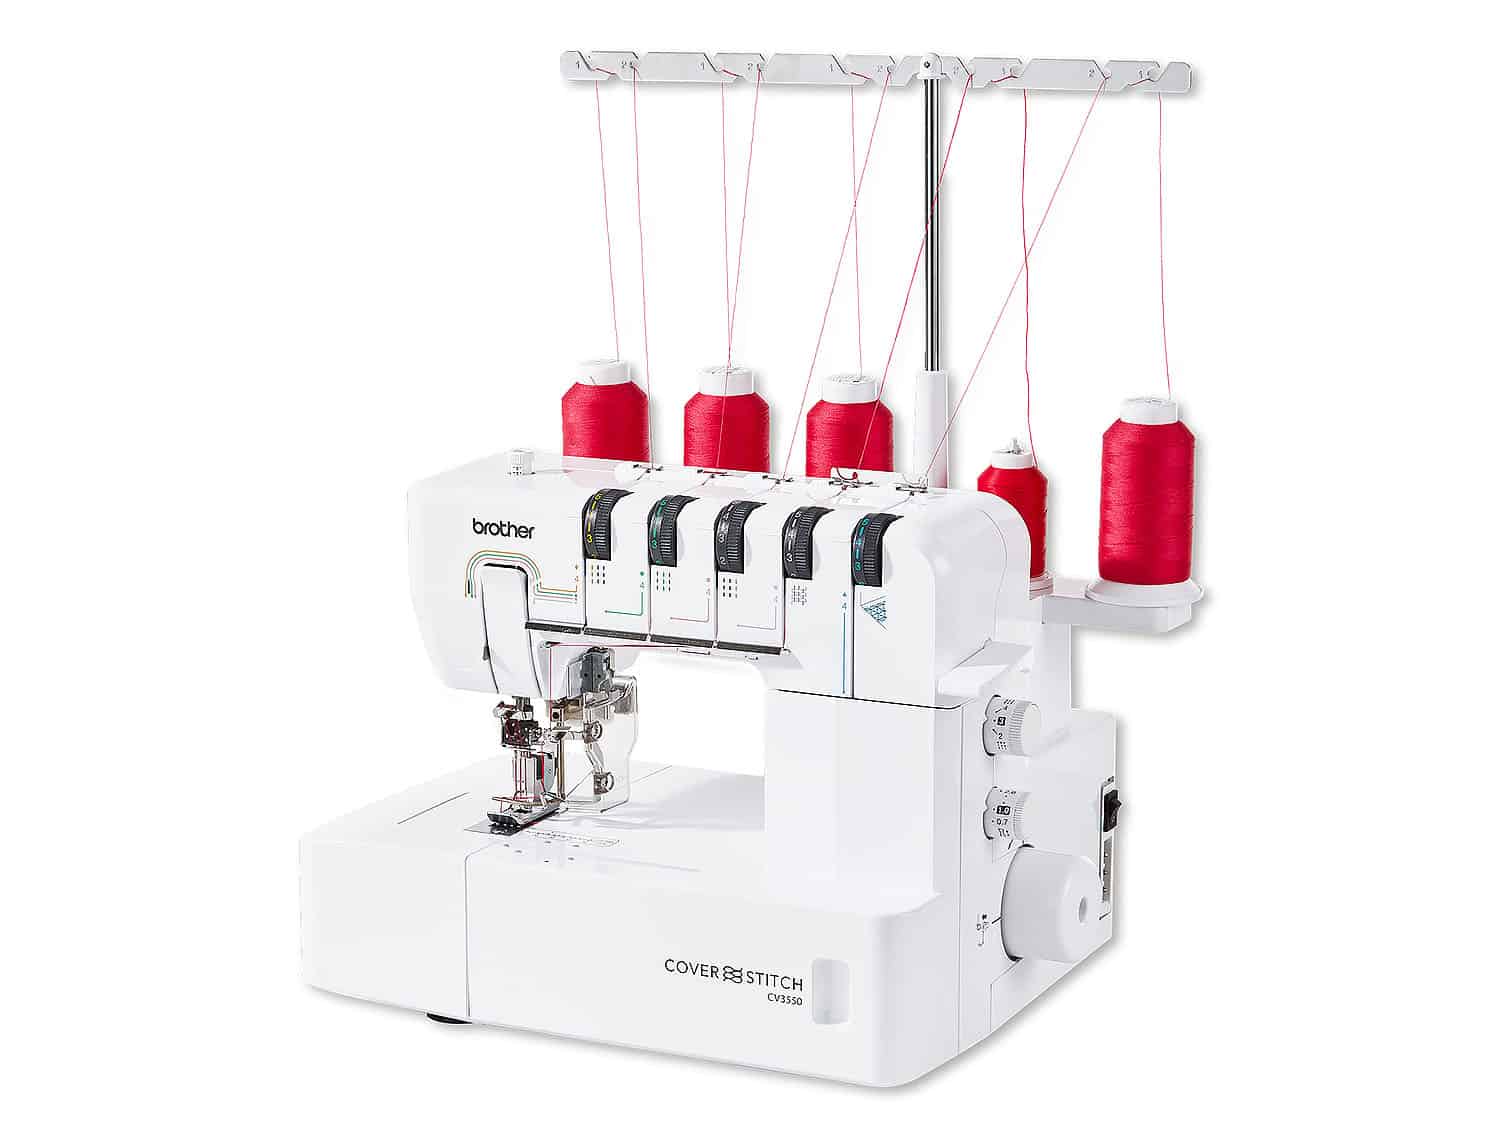 Guide to buying a coverstitch machine